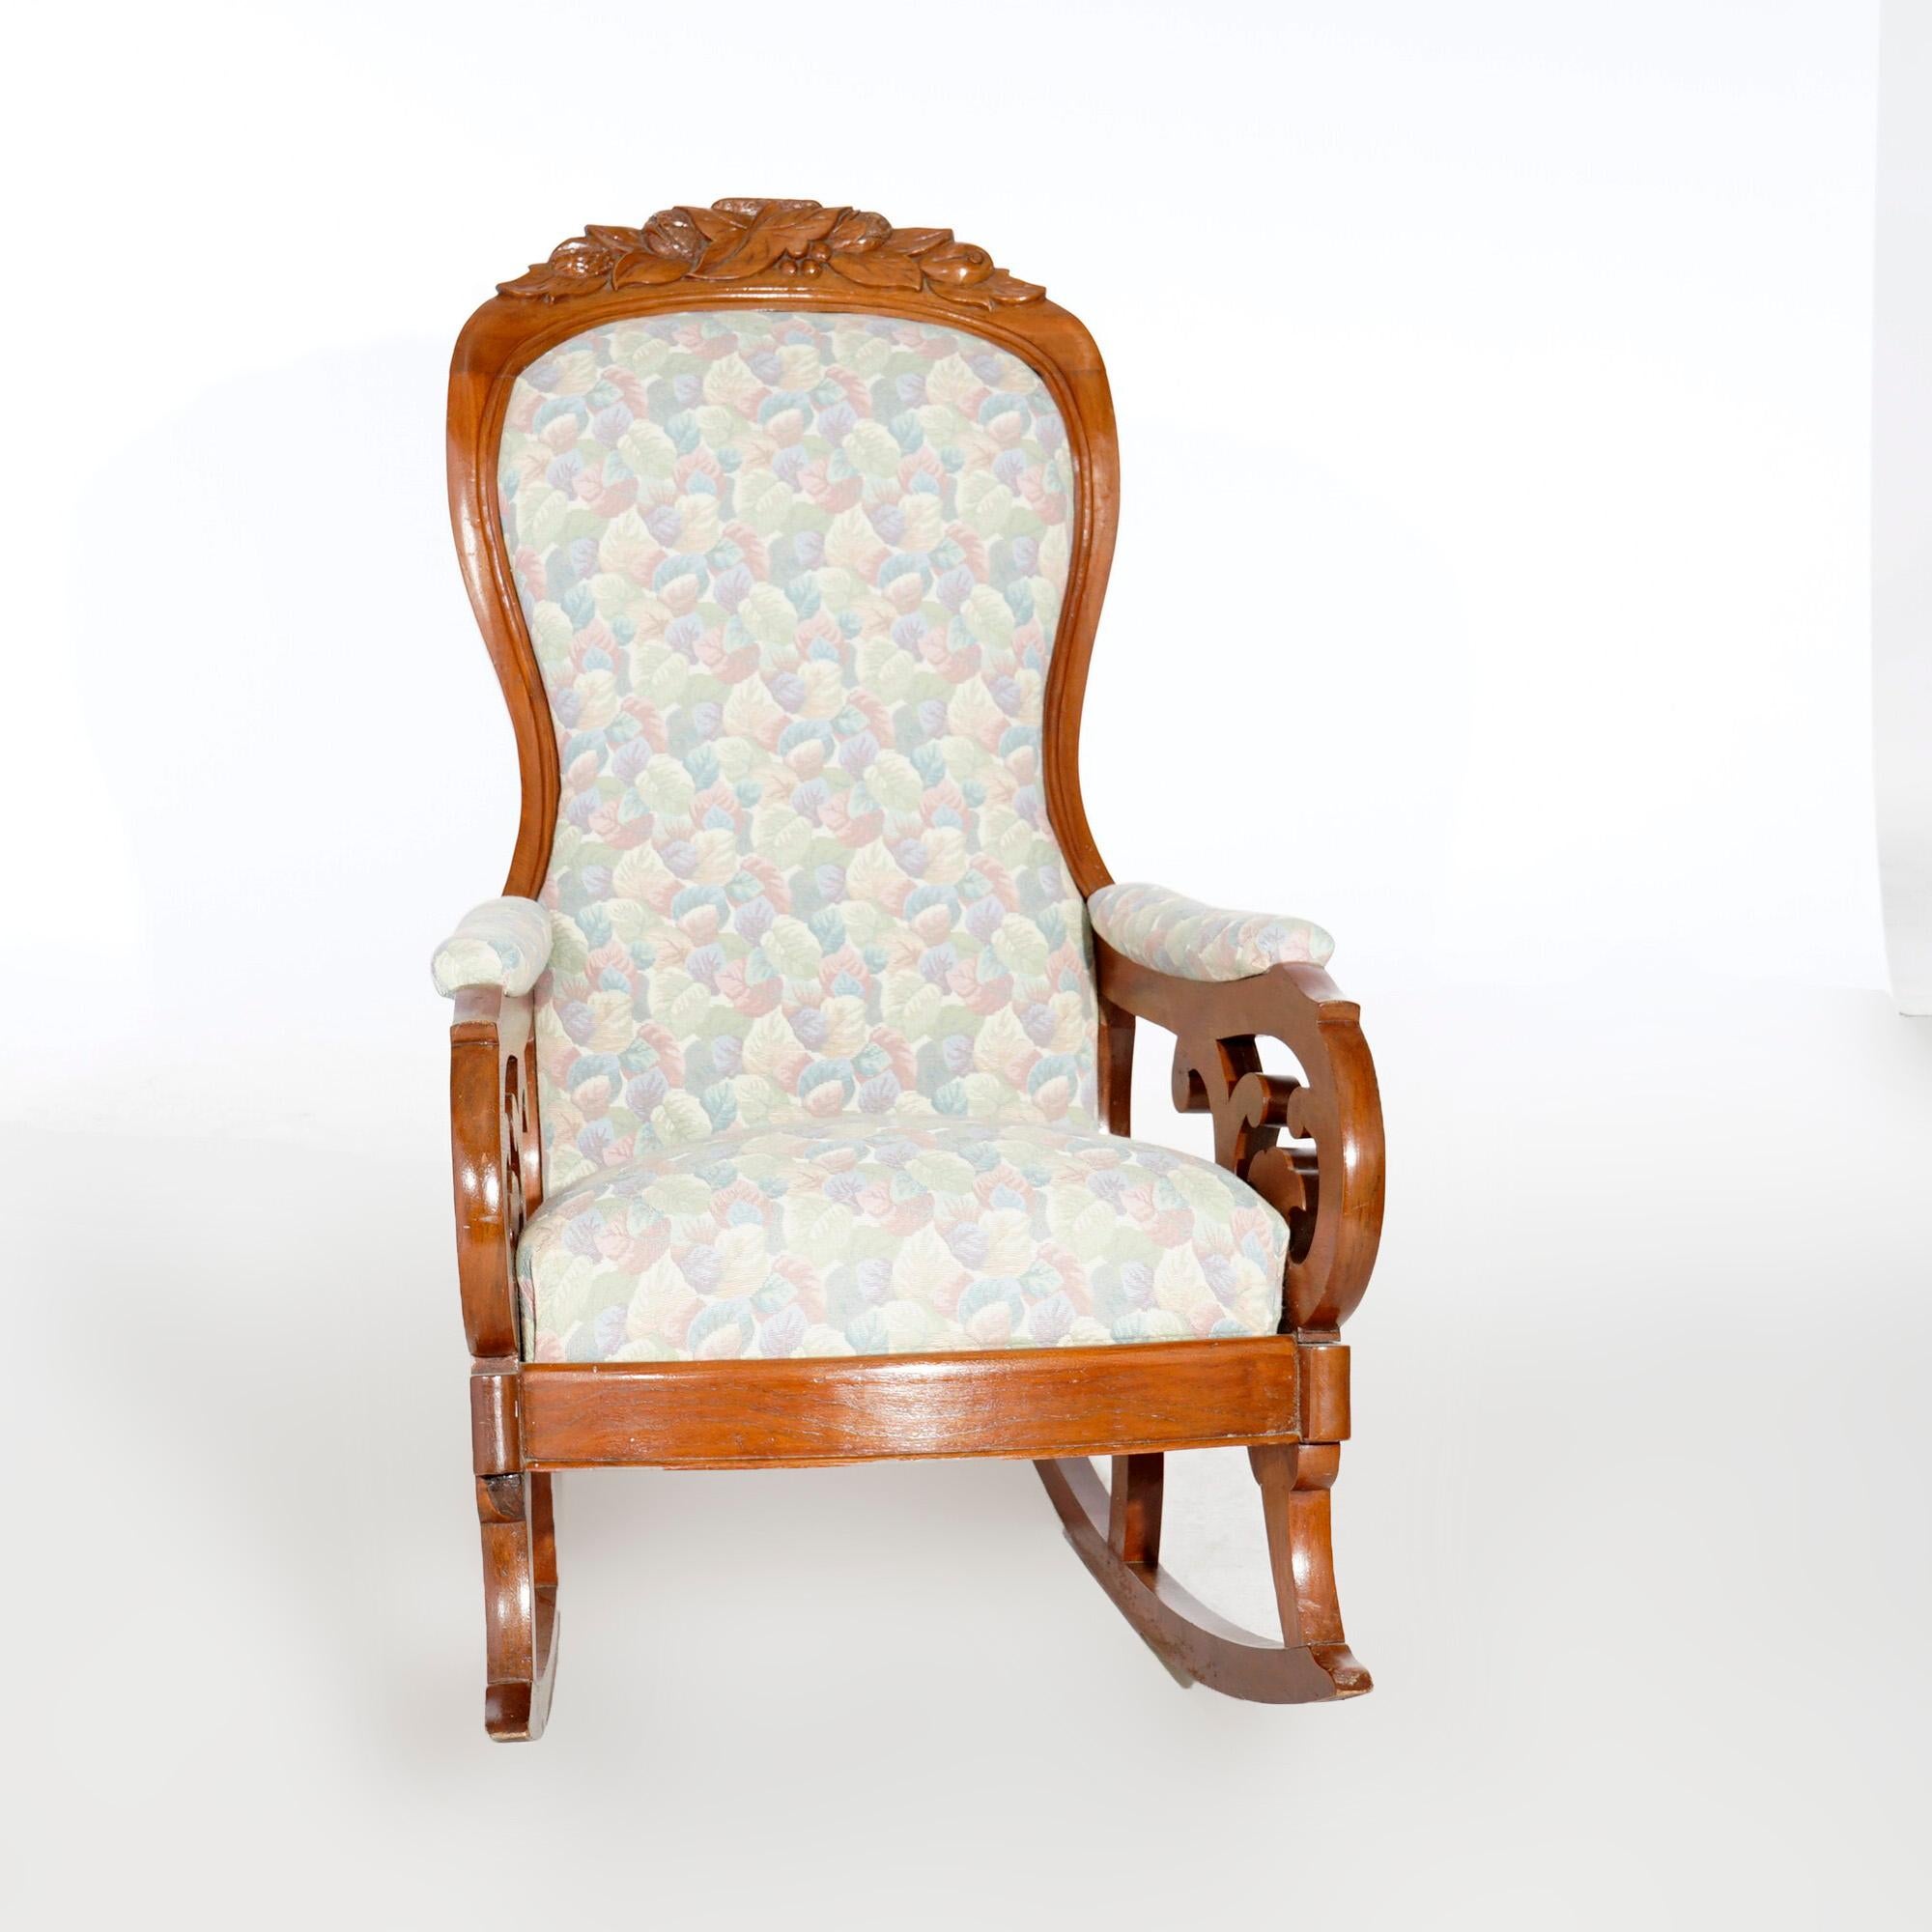 An antique Lincoln rocker offers walnut frame with foliate carved crest over shaped and upholstered back, scroll form arms and upholstered seat, 19th century

Measures- 40''H x 23''W x 39''D

*Ask about DISCOUNTED DELIVERY rates within 1,500 miles